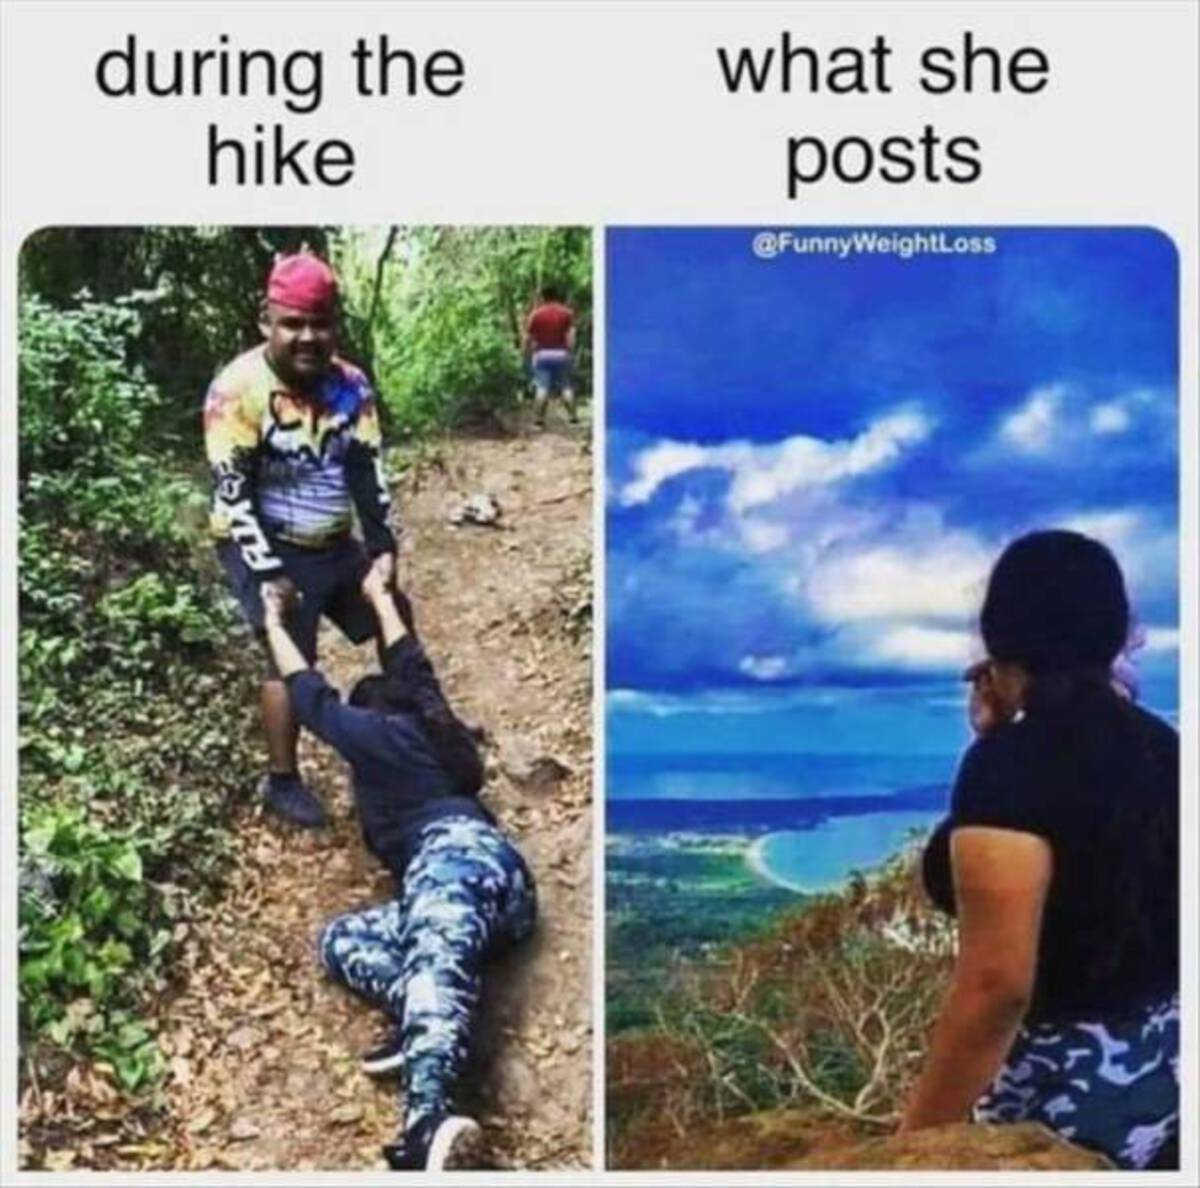 hiking meme - during the hike Flix what she posts